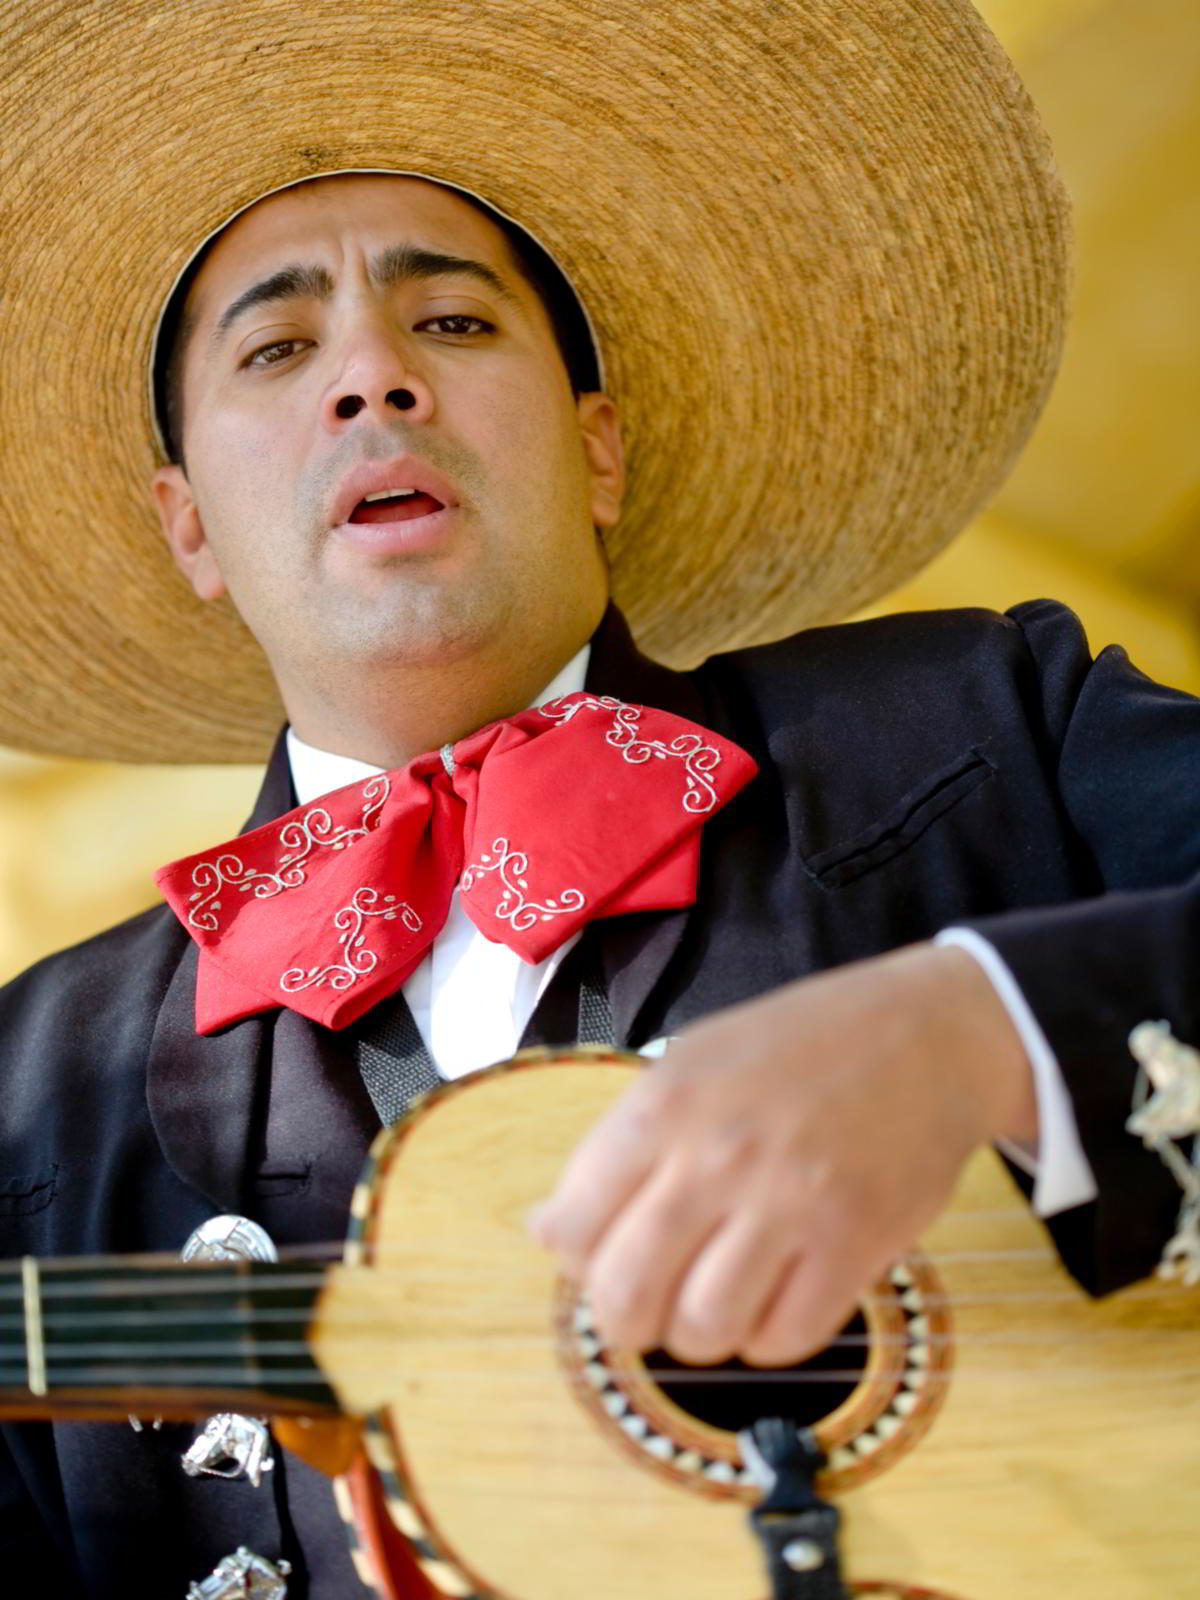 Not Many Really Knew These Mexican Wedding Traditions Until Now ...